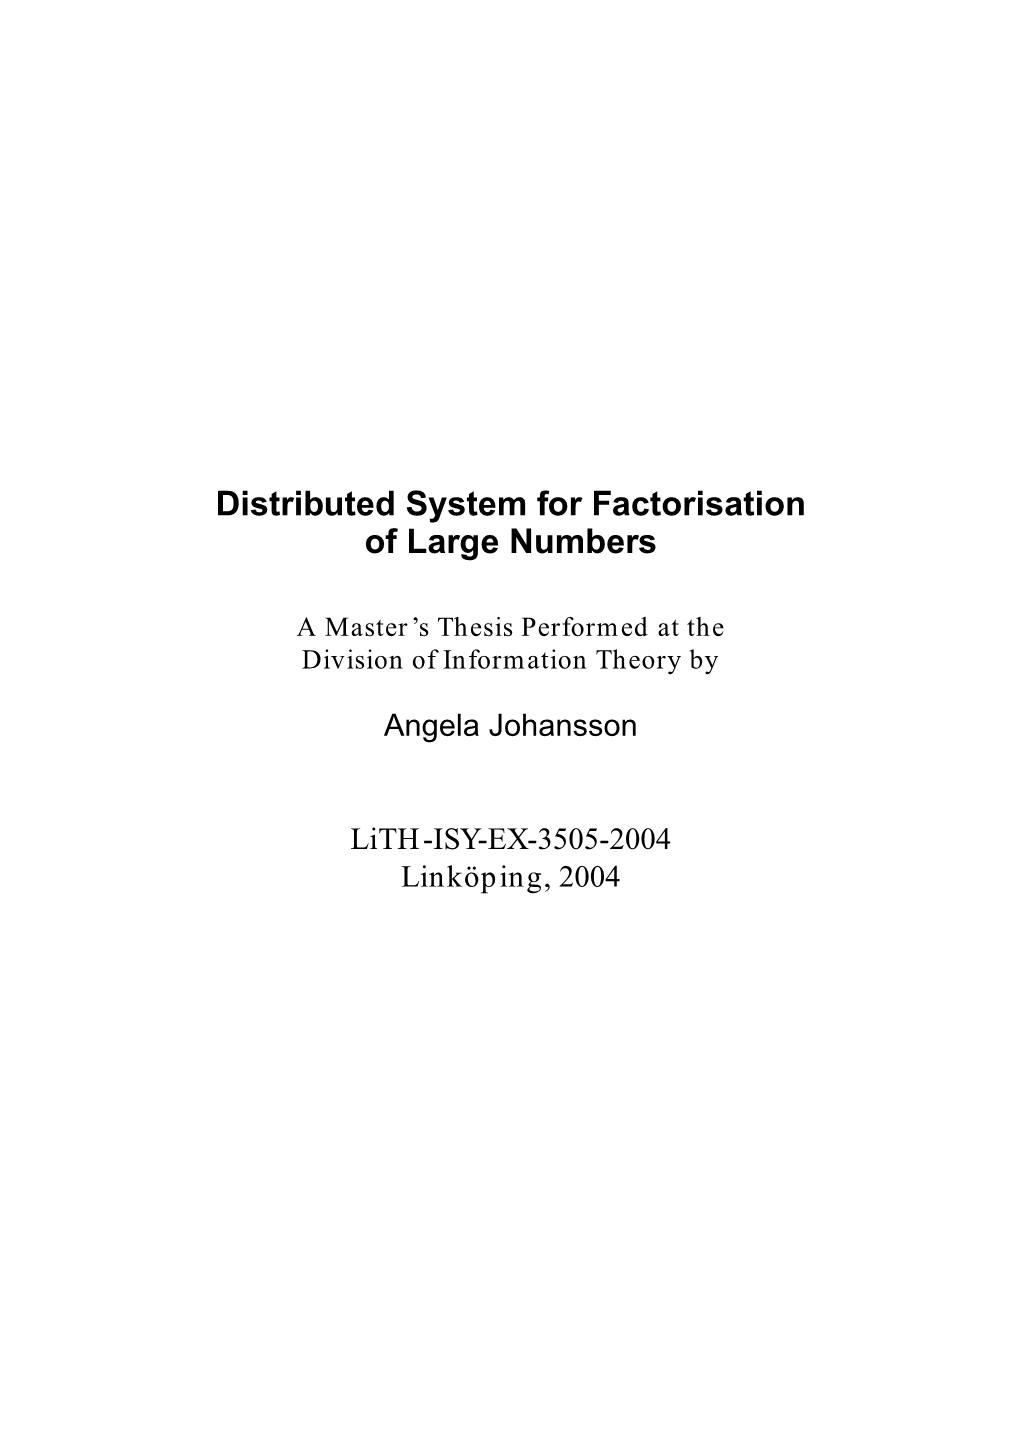 Distributed System for Factorisation of Large Numbers